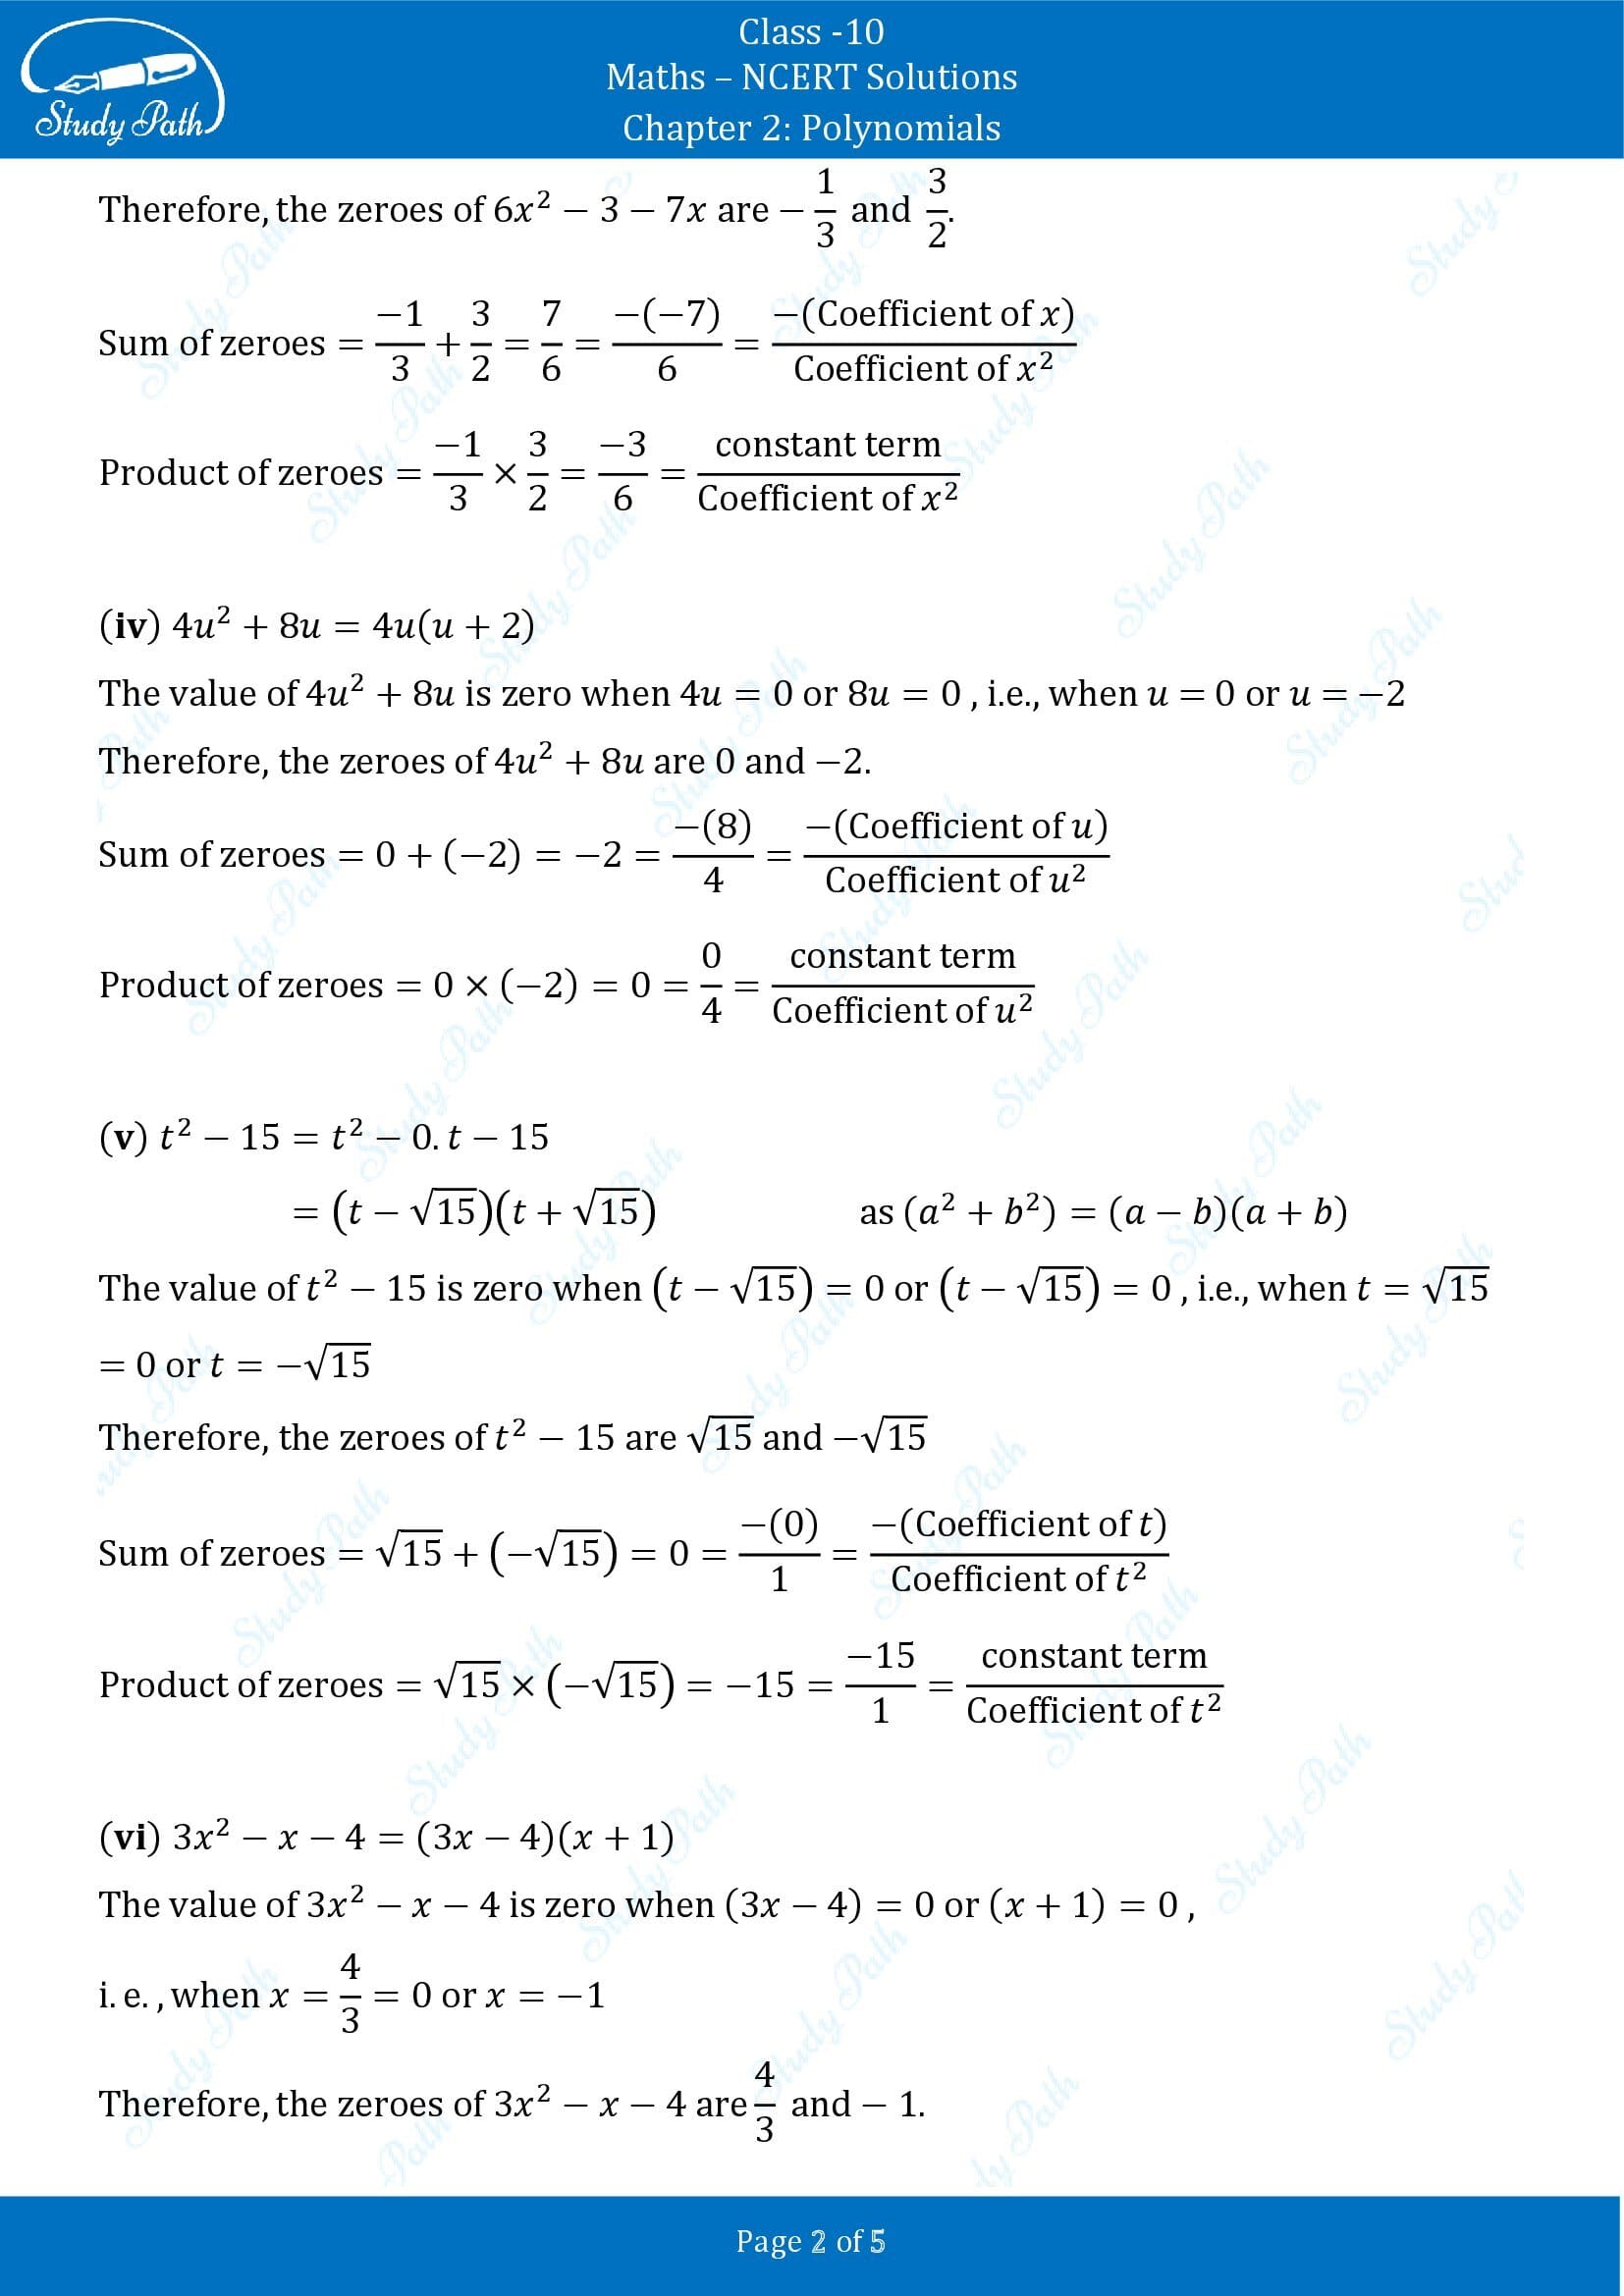 NCERT Solutions for Class 10 Maths Chapter 2 Polynomials Exercise 2.2 00002